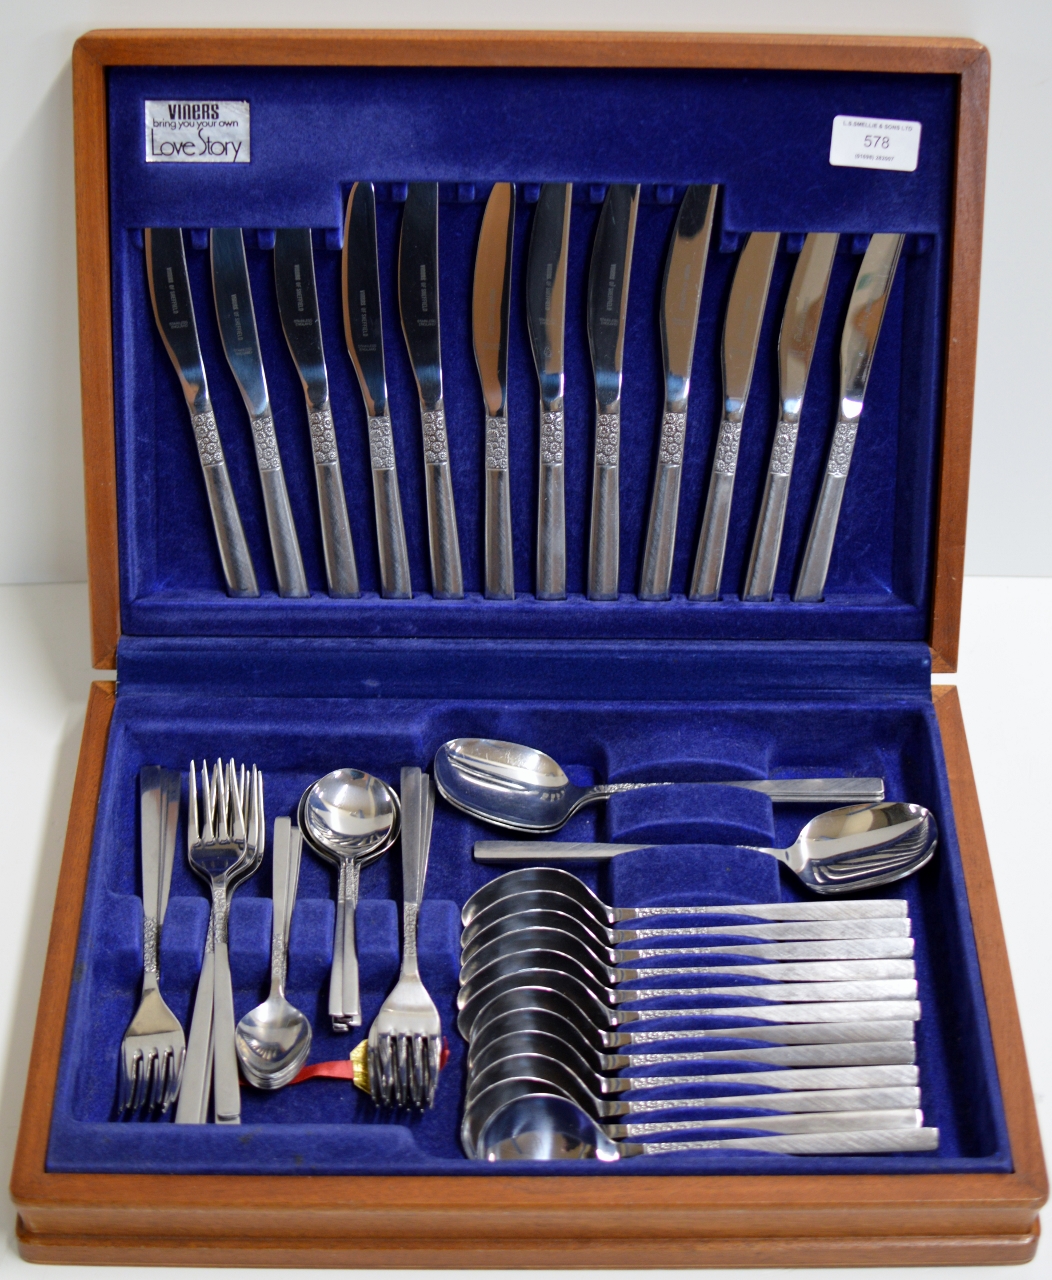 52 PIECE VINER'S "LOVE STORY" CUTLERY SET IN FITTED MAHOGANY CANTEEN